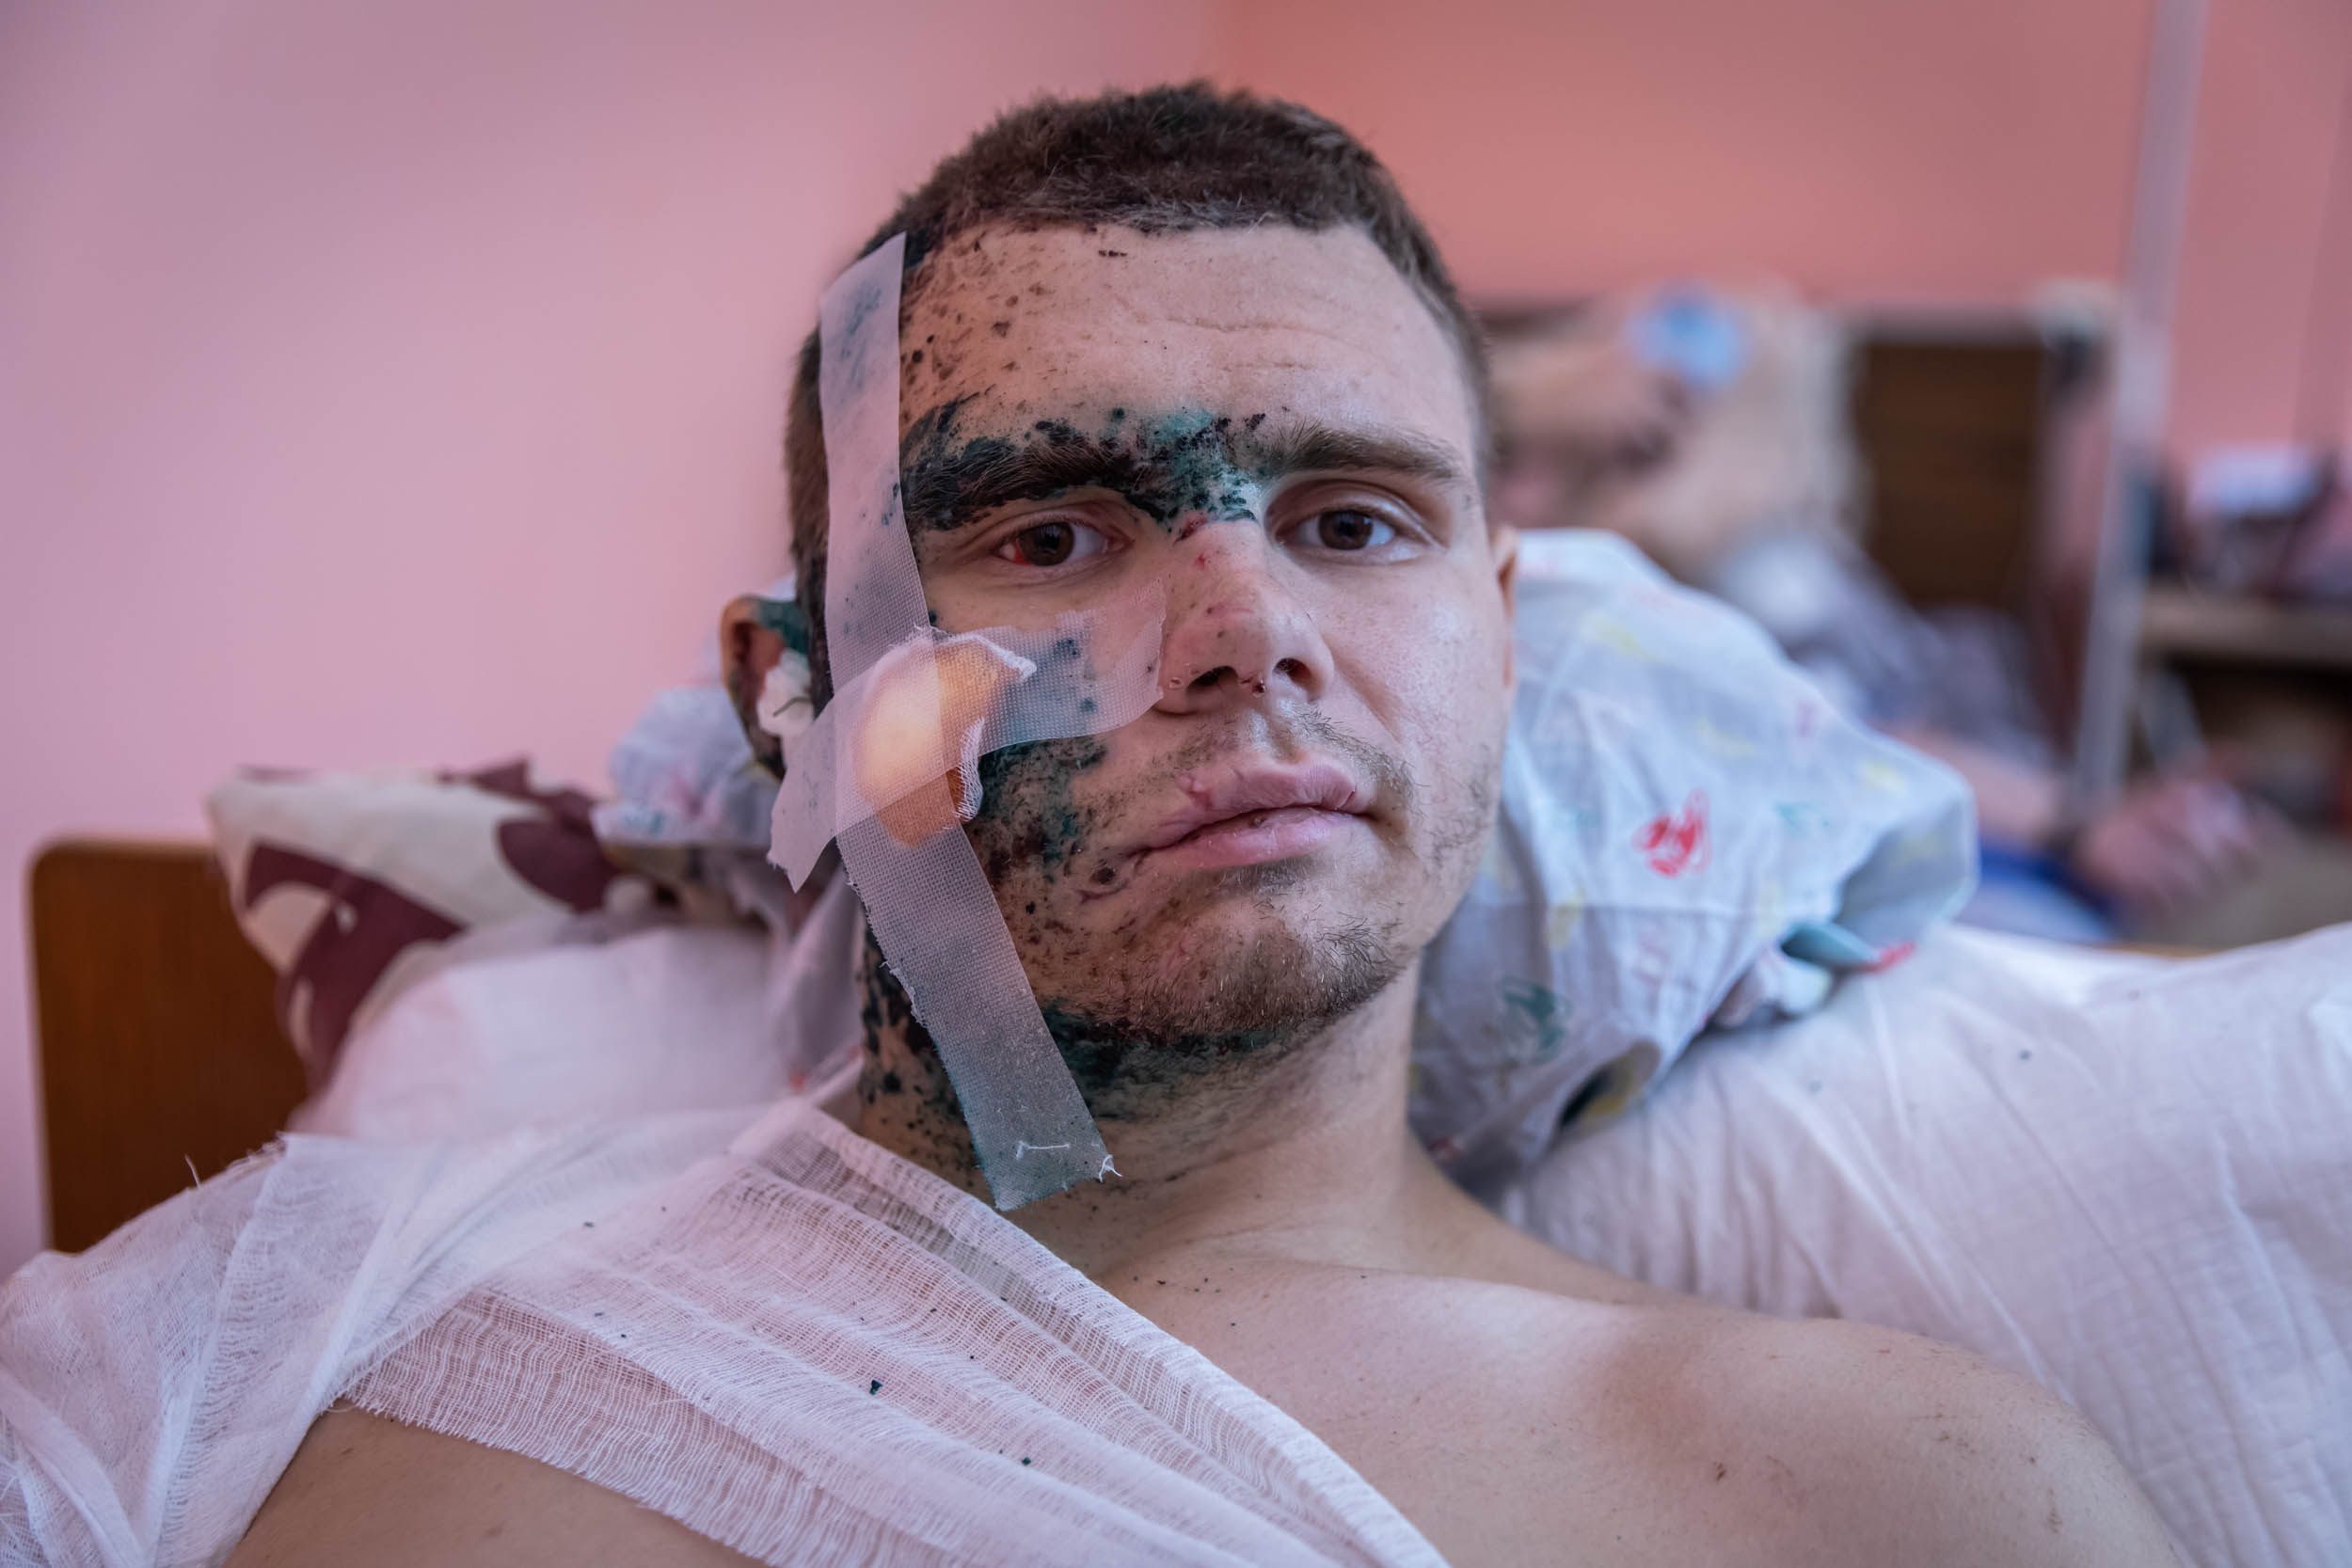 Glyb, injured by a missile while celebrating his graduation at a Black Sea resort.